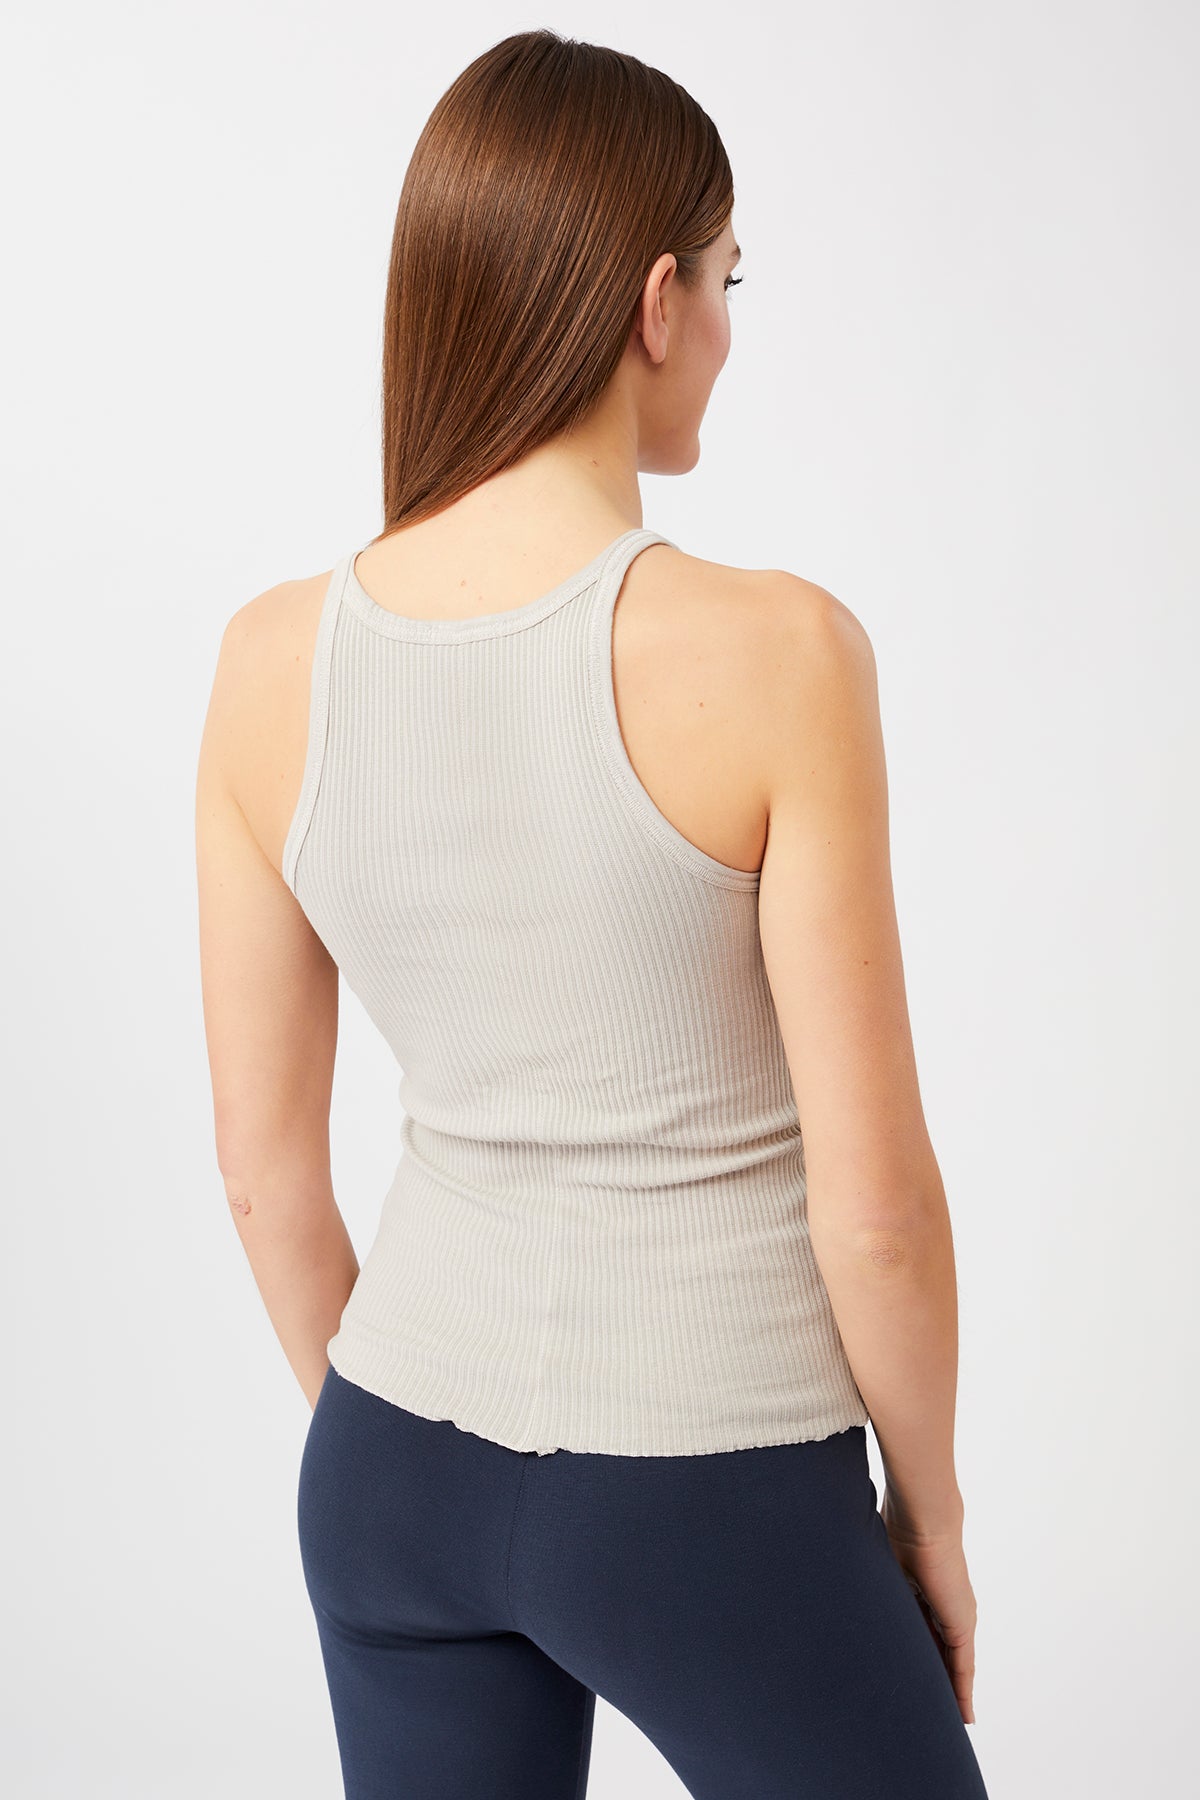 Sustainable Yoga Tops for Women